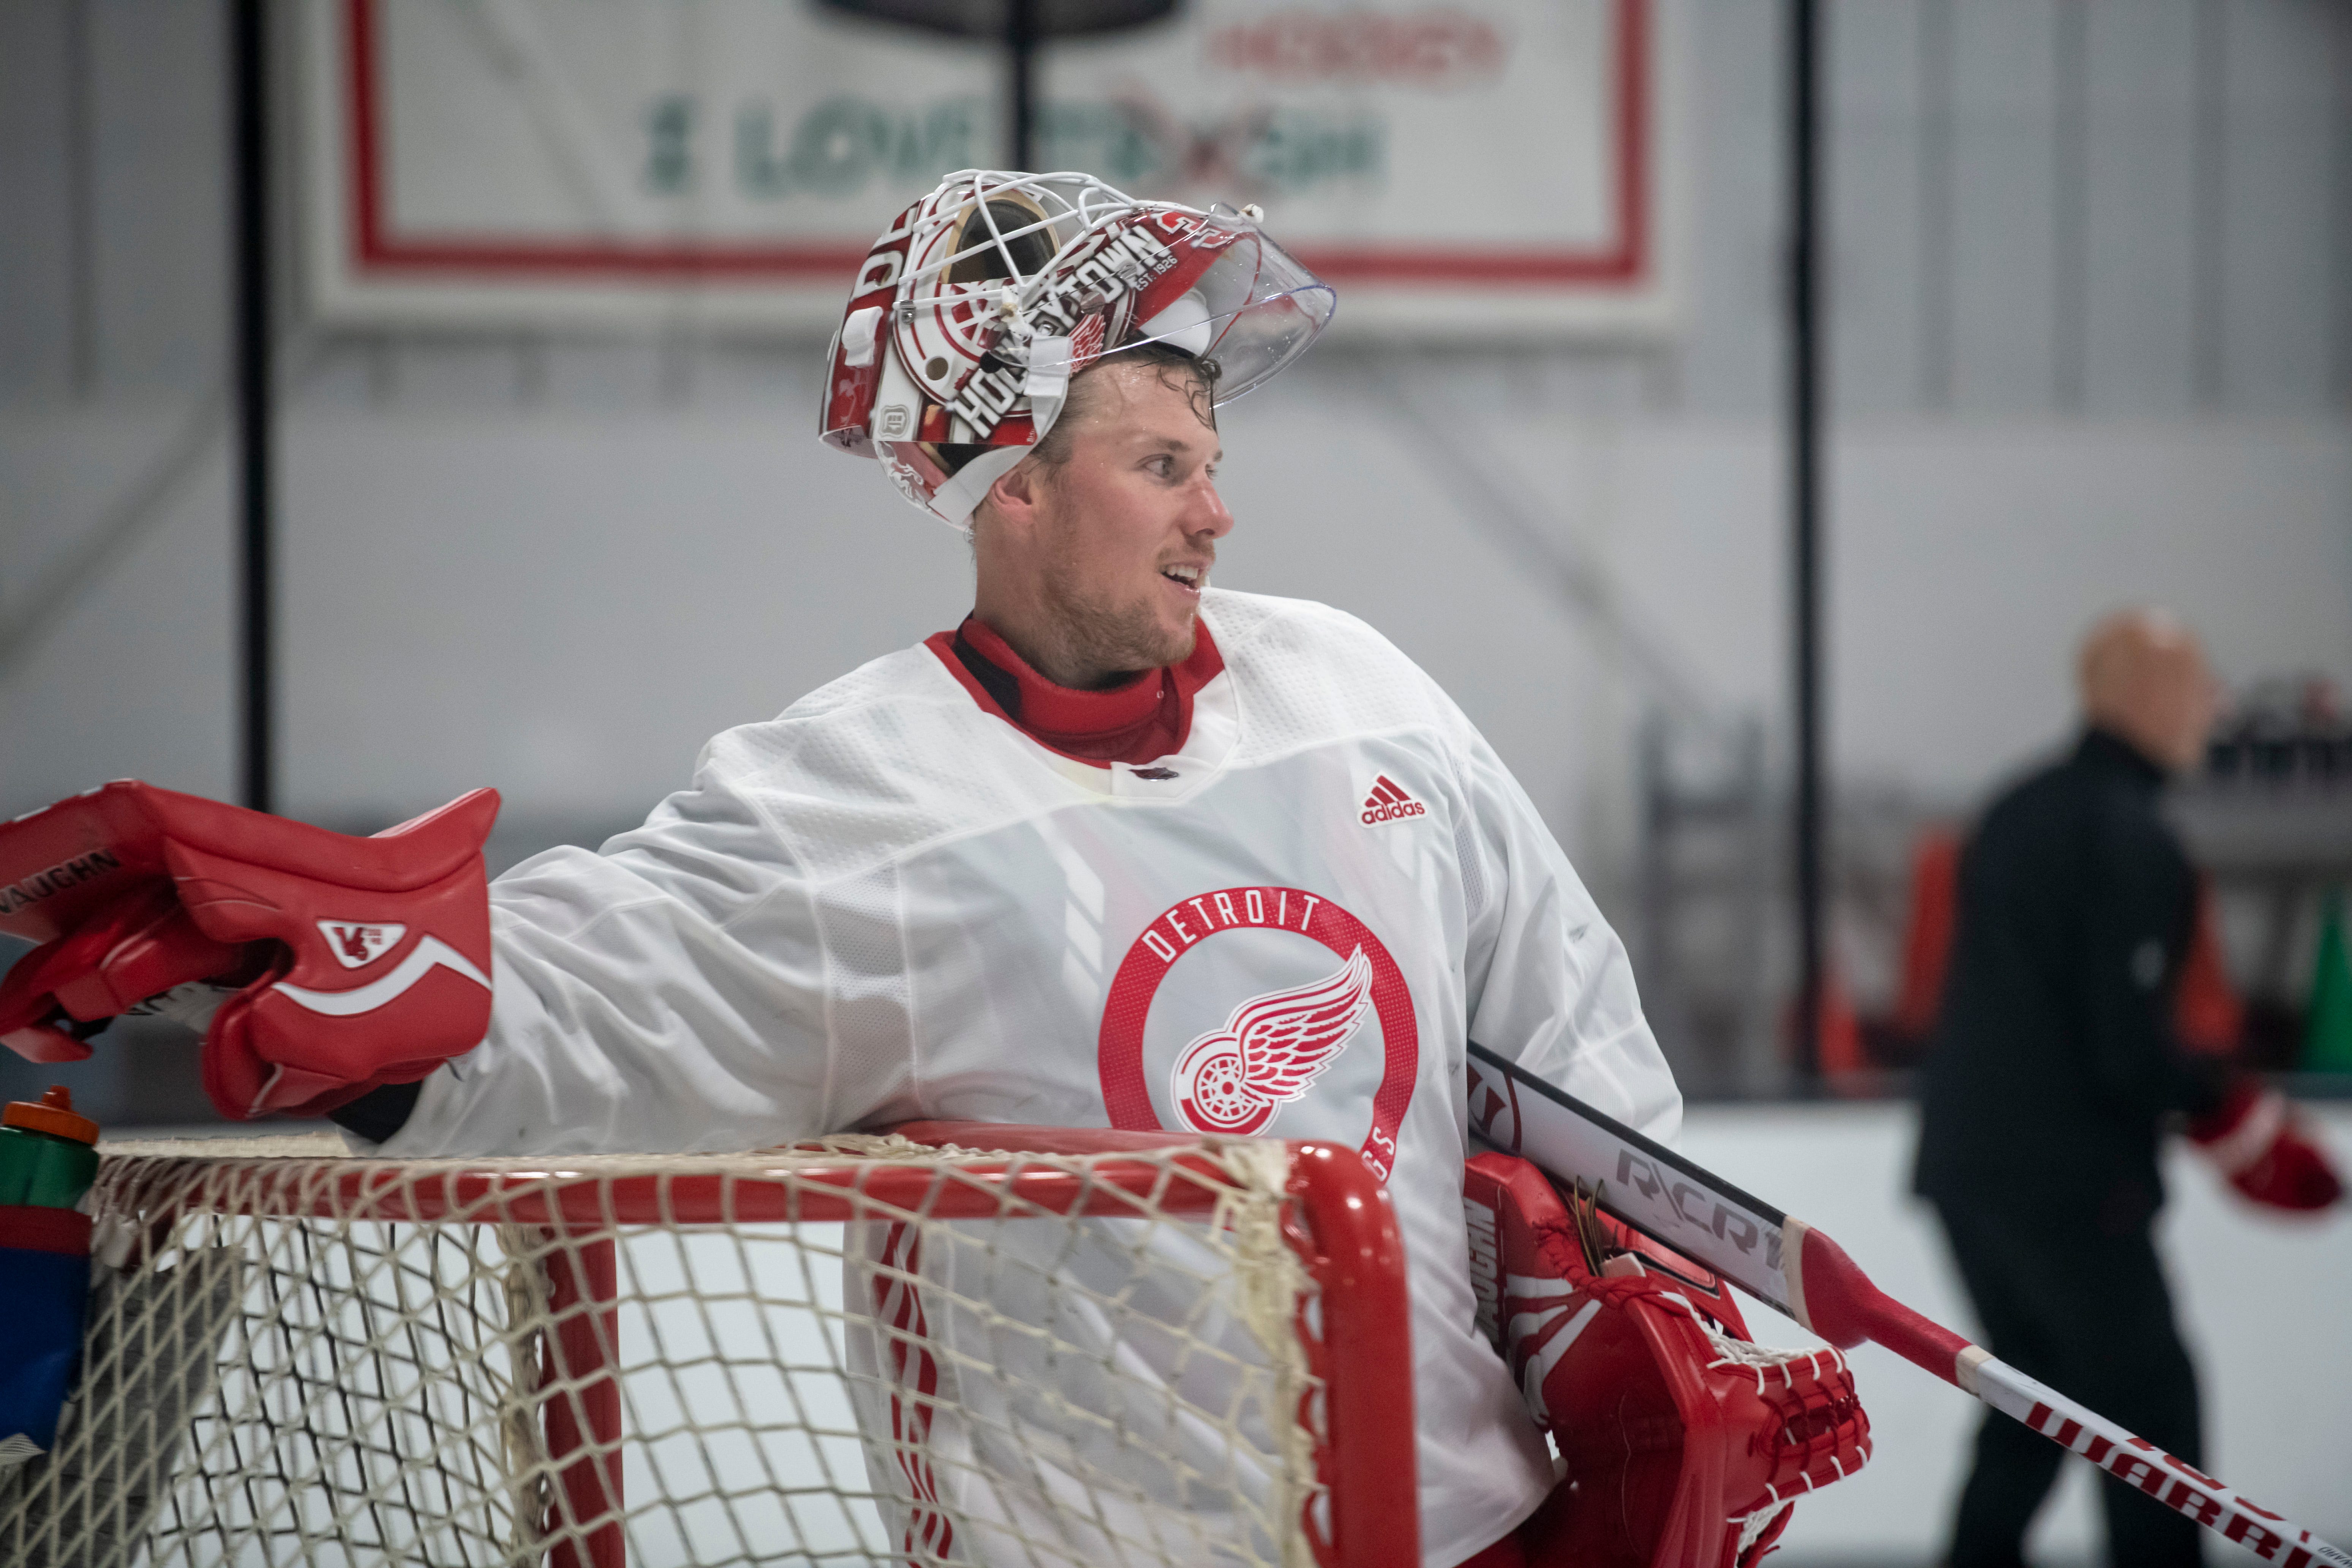 JIMMY HOWARD: AGE: 34. HT: 6-1. WT: 218. STATS: 22-27-9, 2.85 GAA, .910 SV. ANALYSIS: In the final year of his contract, Howard could be prime bait for contending teams at the trade deadline. Or he could be extended, given this position lacks depth in the organization.